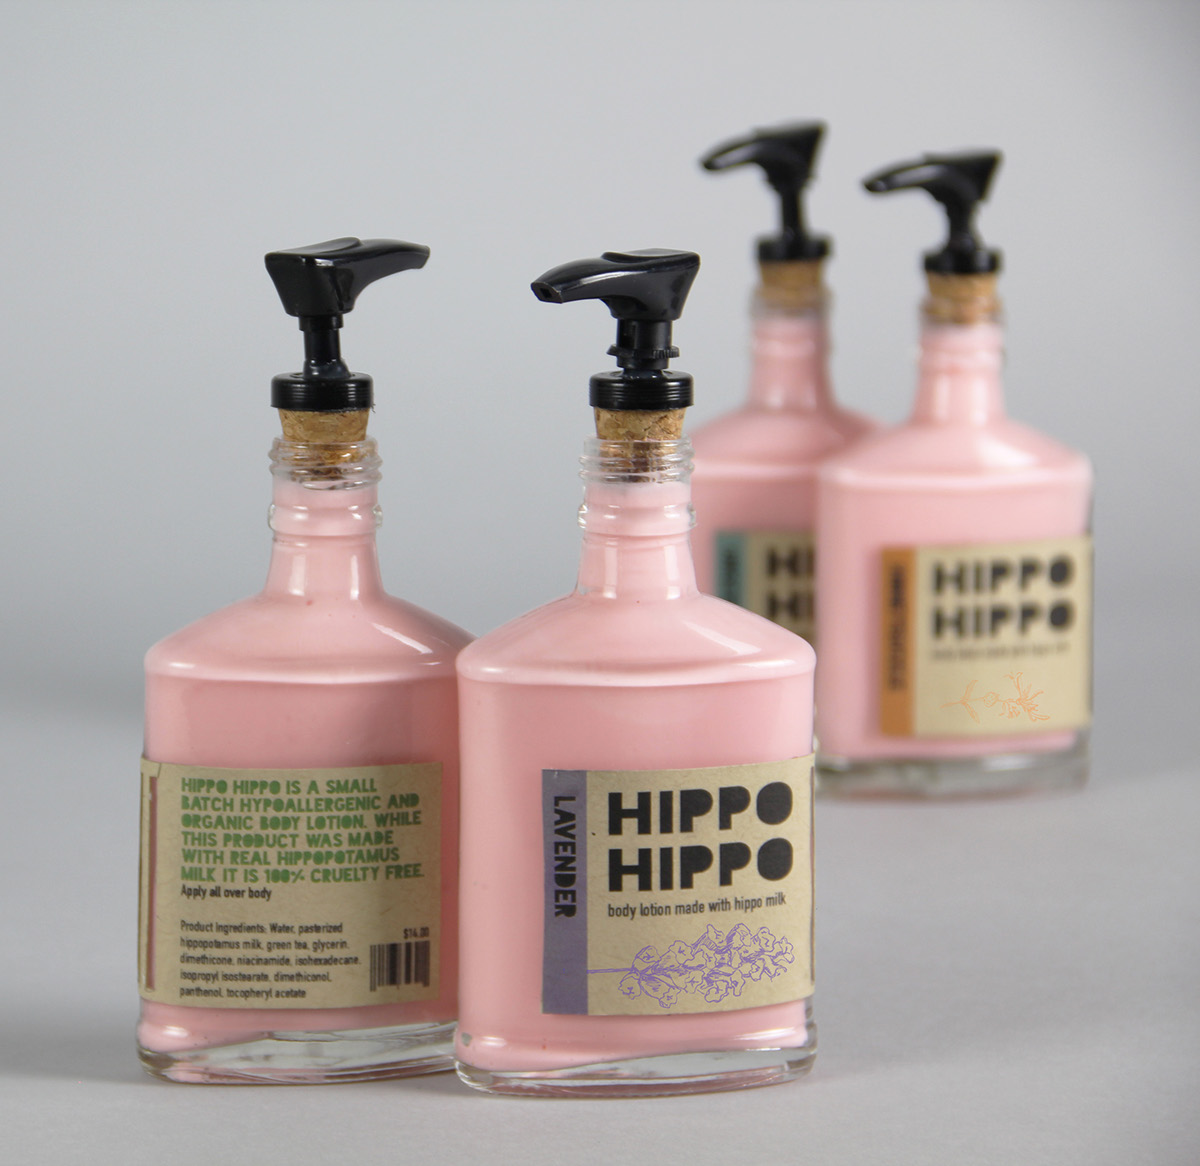 package Hipster body lotion product eco-friendly craft hippo